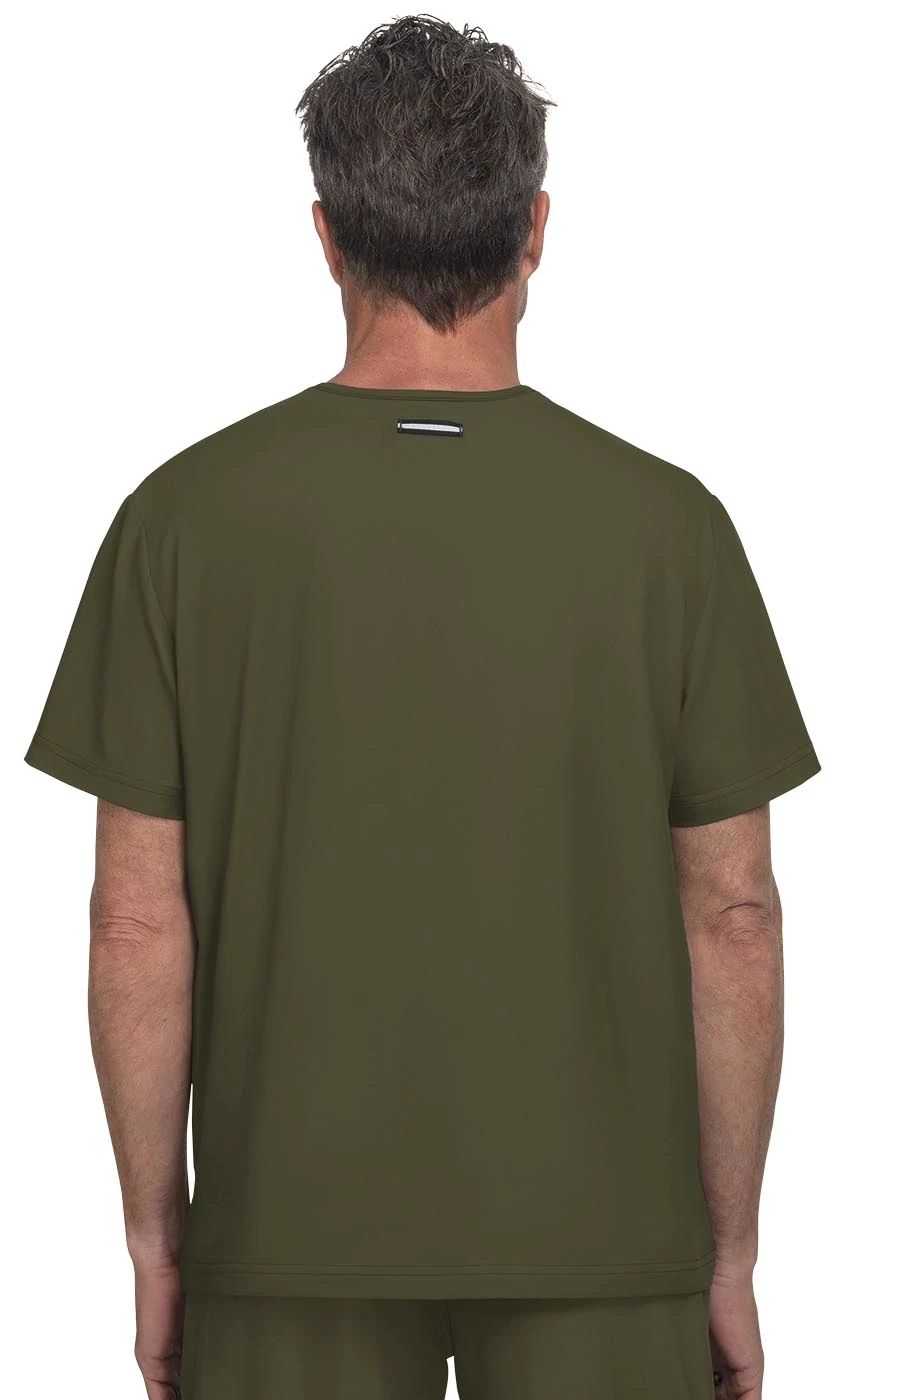 on-call-top-olive-green